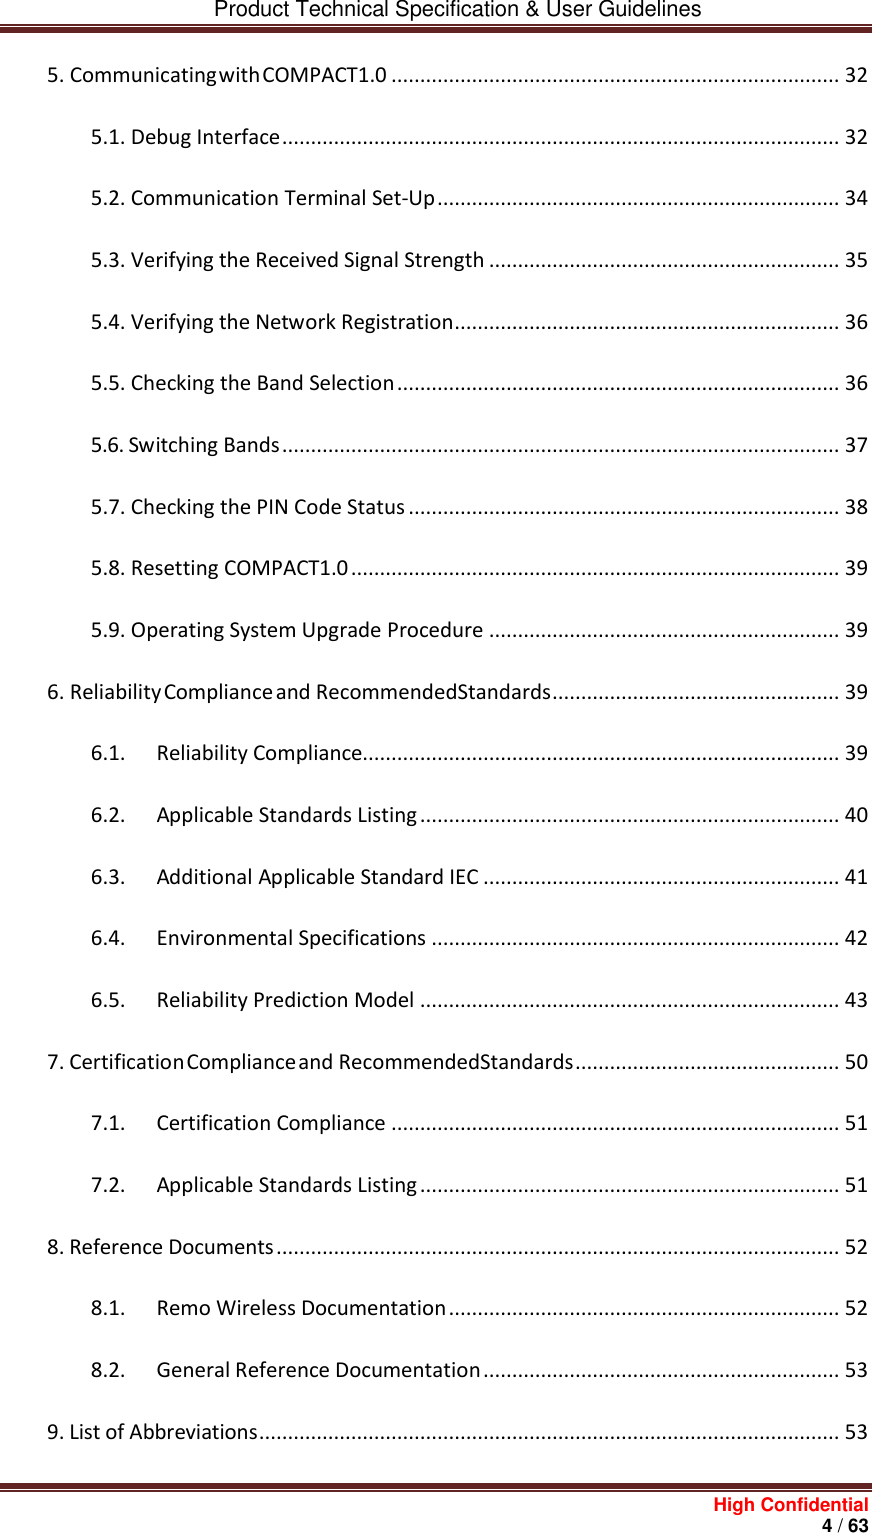         Product Technical Specification &amp; User Guidelines     High Confidential       4 / 63  5. Communicating with COMPACT1.0 .............................................................................. 32 5.1. Debug Interface ................................................................................................. 32 5.2. Communication Terminal Set-Up ...................................................................... 34 5.3. Verifying the Received Signal Strength ............................................................. 35 5.4. Verifying the Network Registration ................................................................... 36 5.5. Checking the Band Selection ............................................................................. 36 5.6. Switching Bands ................................................................................................. 37 5.7. Checking the PIN Code Status ........................................................................... 38 5.8. Resetting COMPACT1.0 ..................................................................................... 39 5.9. Operating System Upgrade Procedure ............................................................. 39 6. Reliability Compliance and Recommended Standards .................................................. 39 6.1. Reliability Compliance................................................................................... 39 6.2. Applicable Standards Listing ......................................................................... 40 6.3. Additional Applicable Standard IEC .............................................................. 41 6.4. Environmental Specifications ....................................................................... 42 6.5. Reliability Prediction Model ......................................................................... 43 7. Certification Compliance and Recommended Standards .............................................. 50 7.1. Certification Compliance .............................................................................. 51 7.2. Applicable Standards Listing ......................................................................... 51 8. Reference Documents .................................................................................................. 52 8.1. Remo Wireless Documentation .................................................................... 52 8.2. General Reference Documentation .............................................................. 53 9. List of Abbreviations ..................................................................................................... 53 